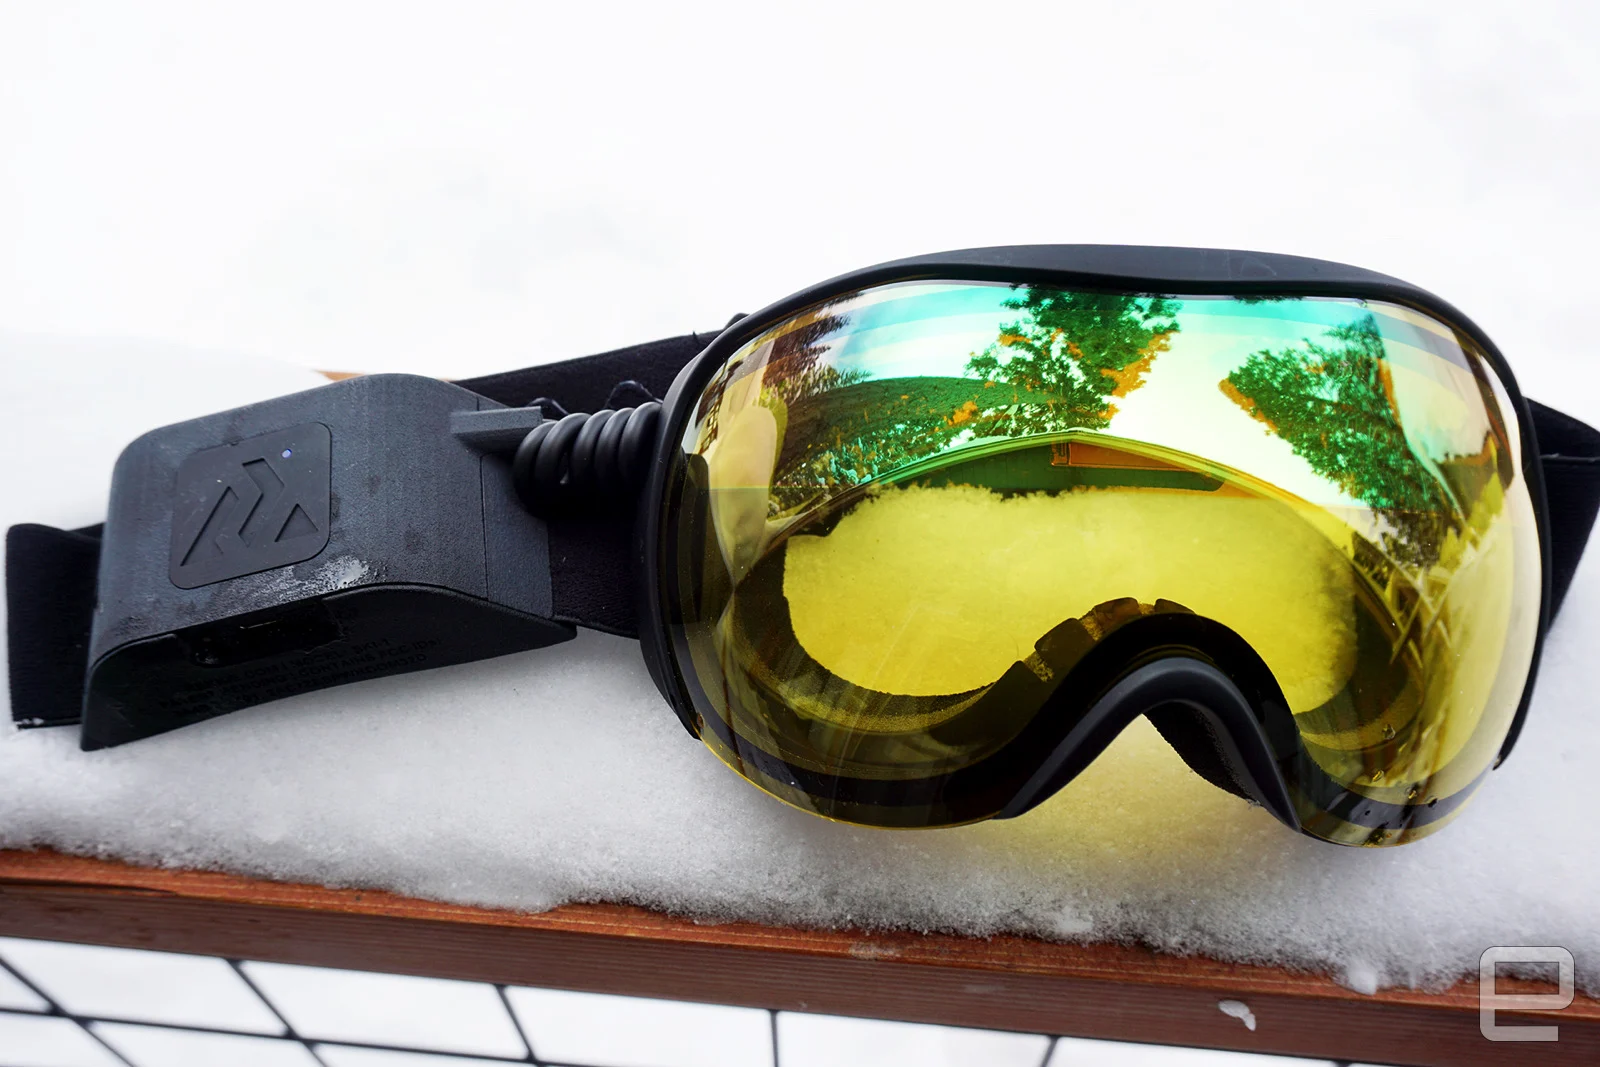 Ski goggles with yellow lenses and a battery pack on the side of the strap.                               